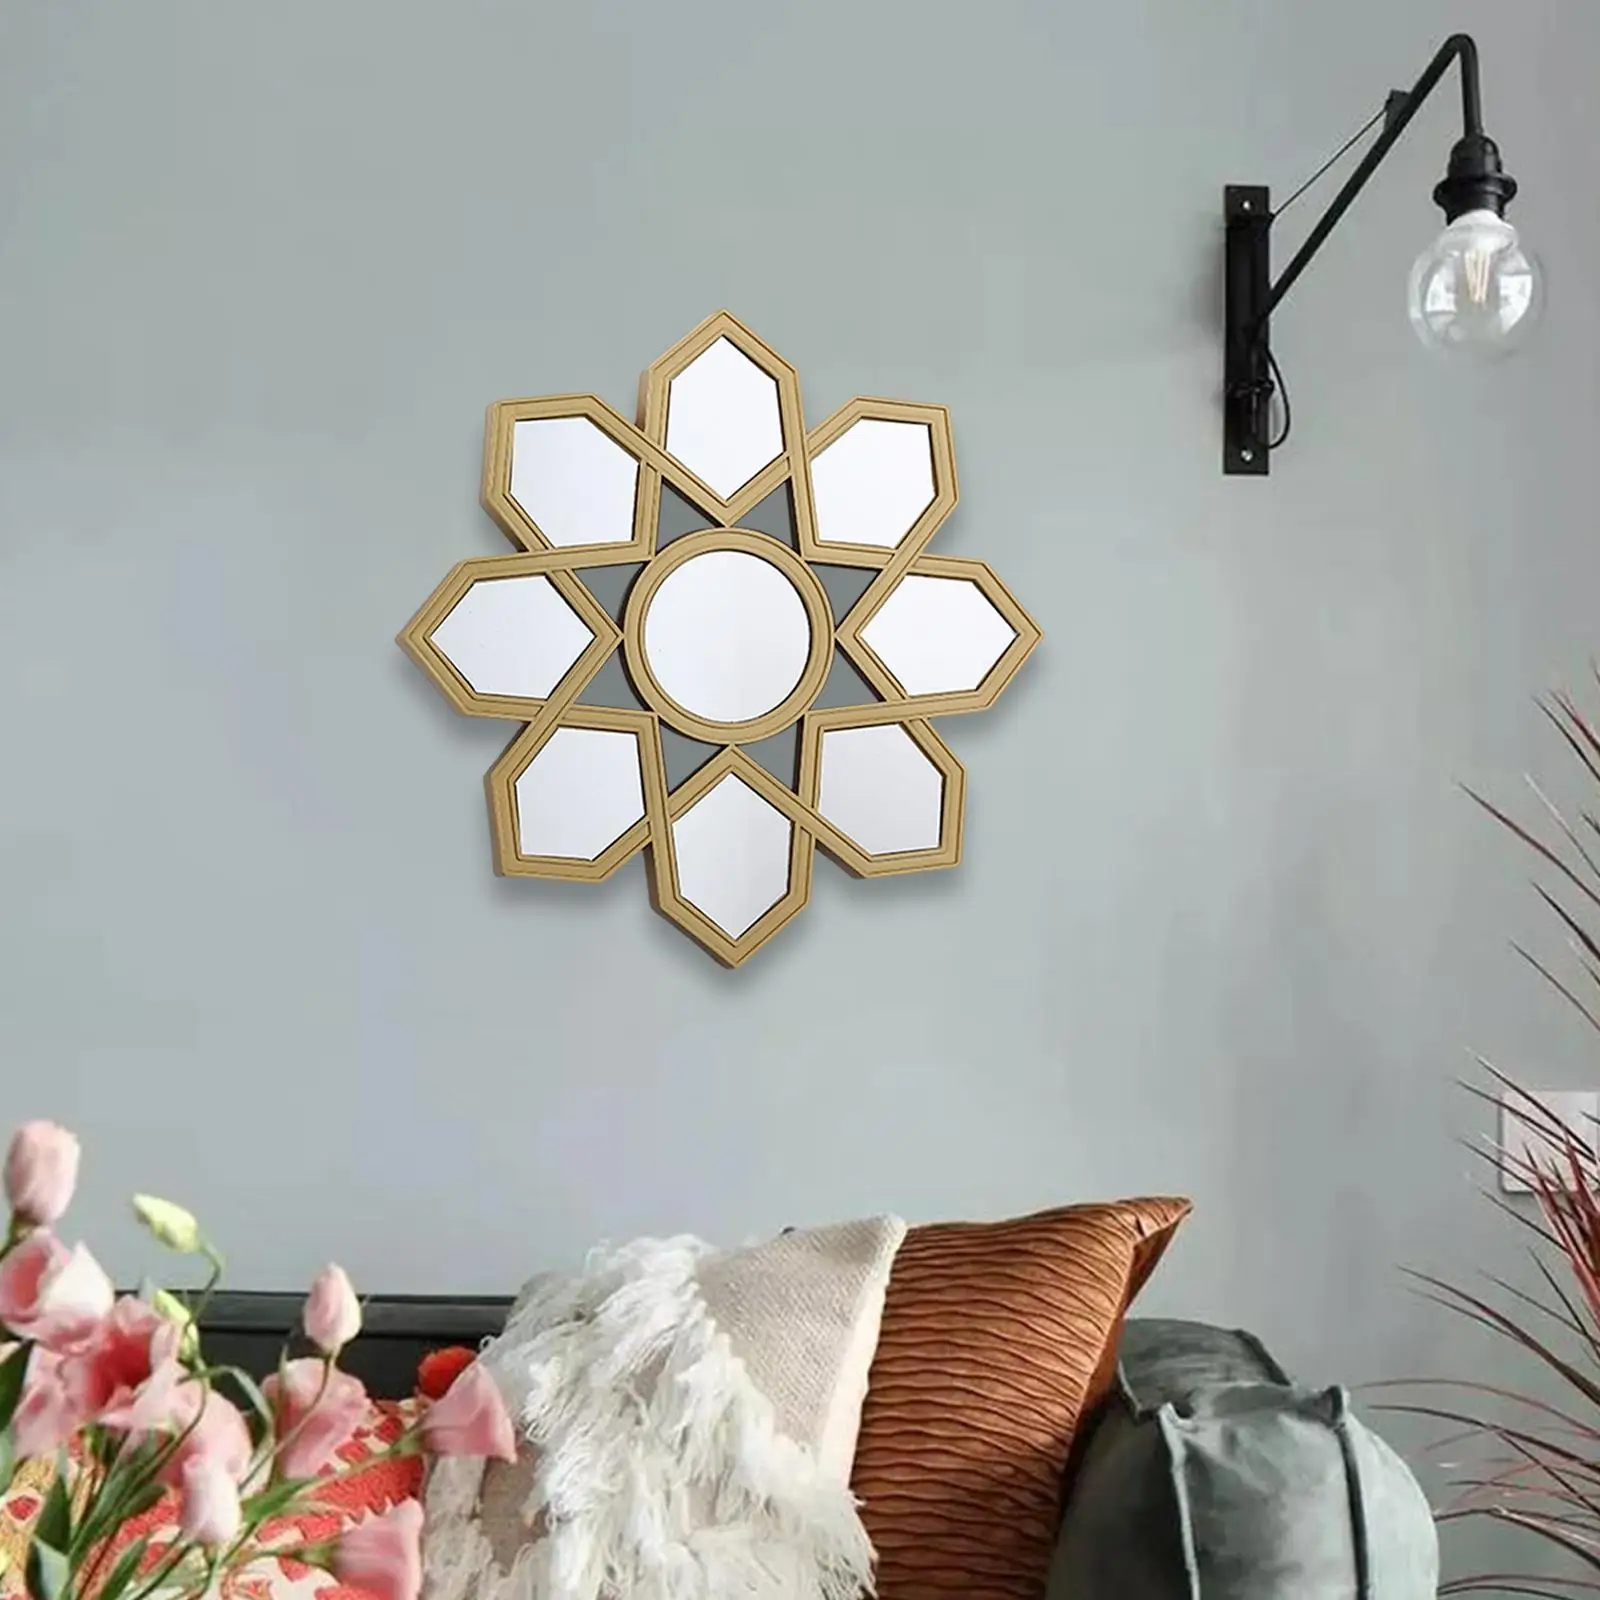 Wall Hanging Mirror Decorative Circle Mirror Round Makeup Mirror for Home Furnishing Washroom Entrance Bedroom Wall Decor